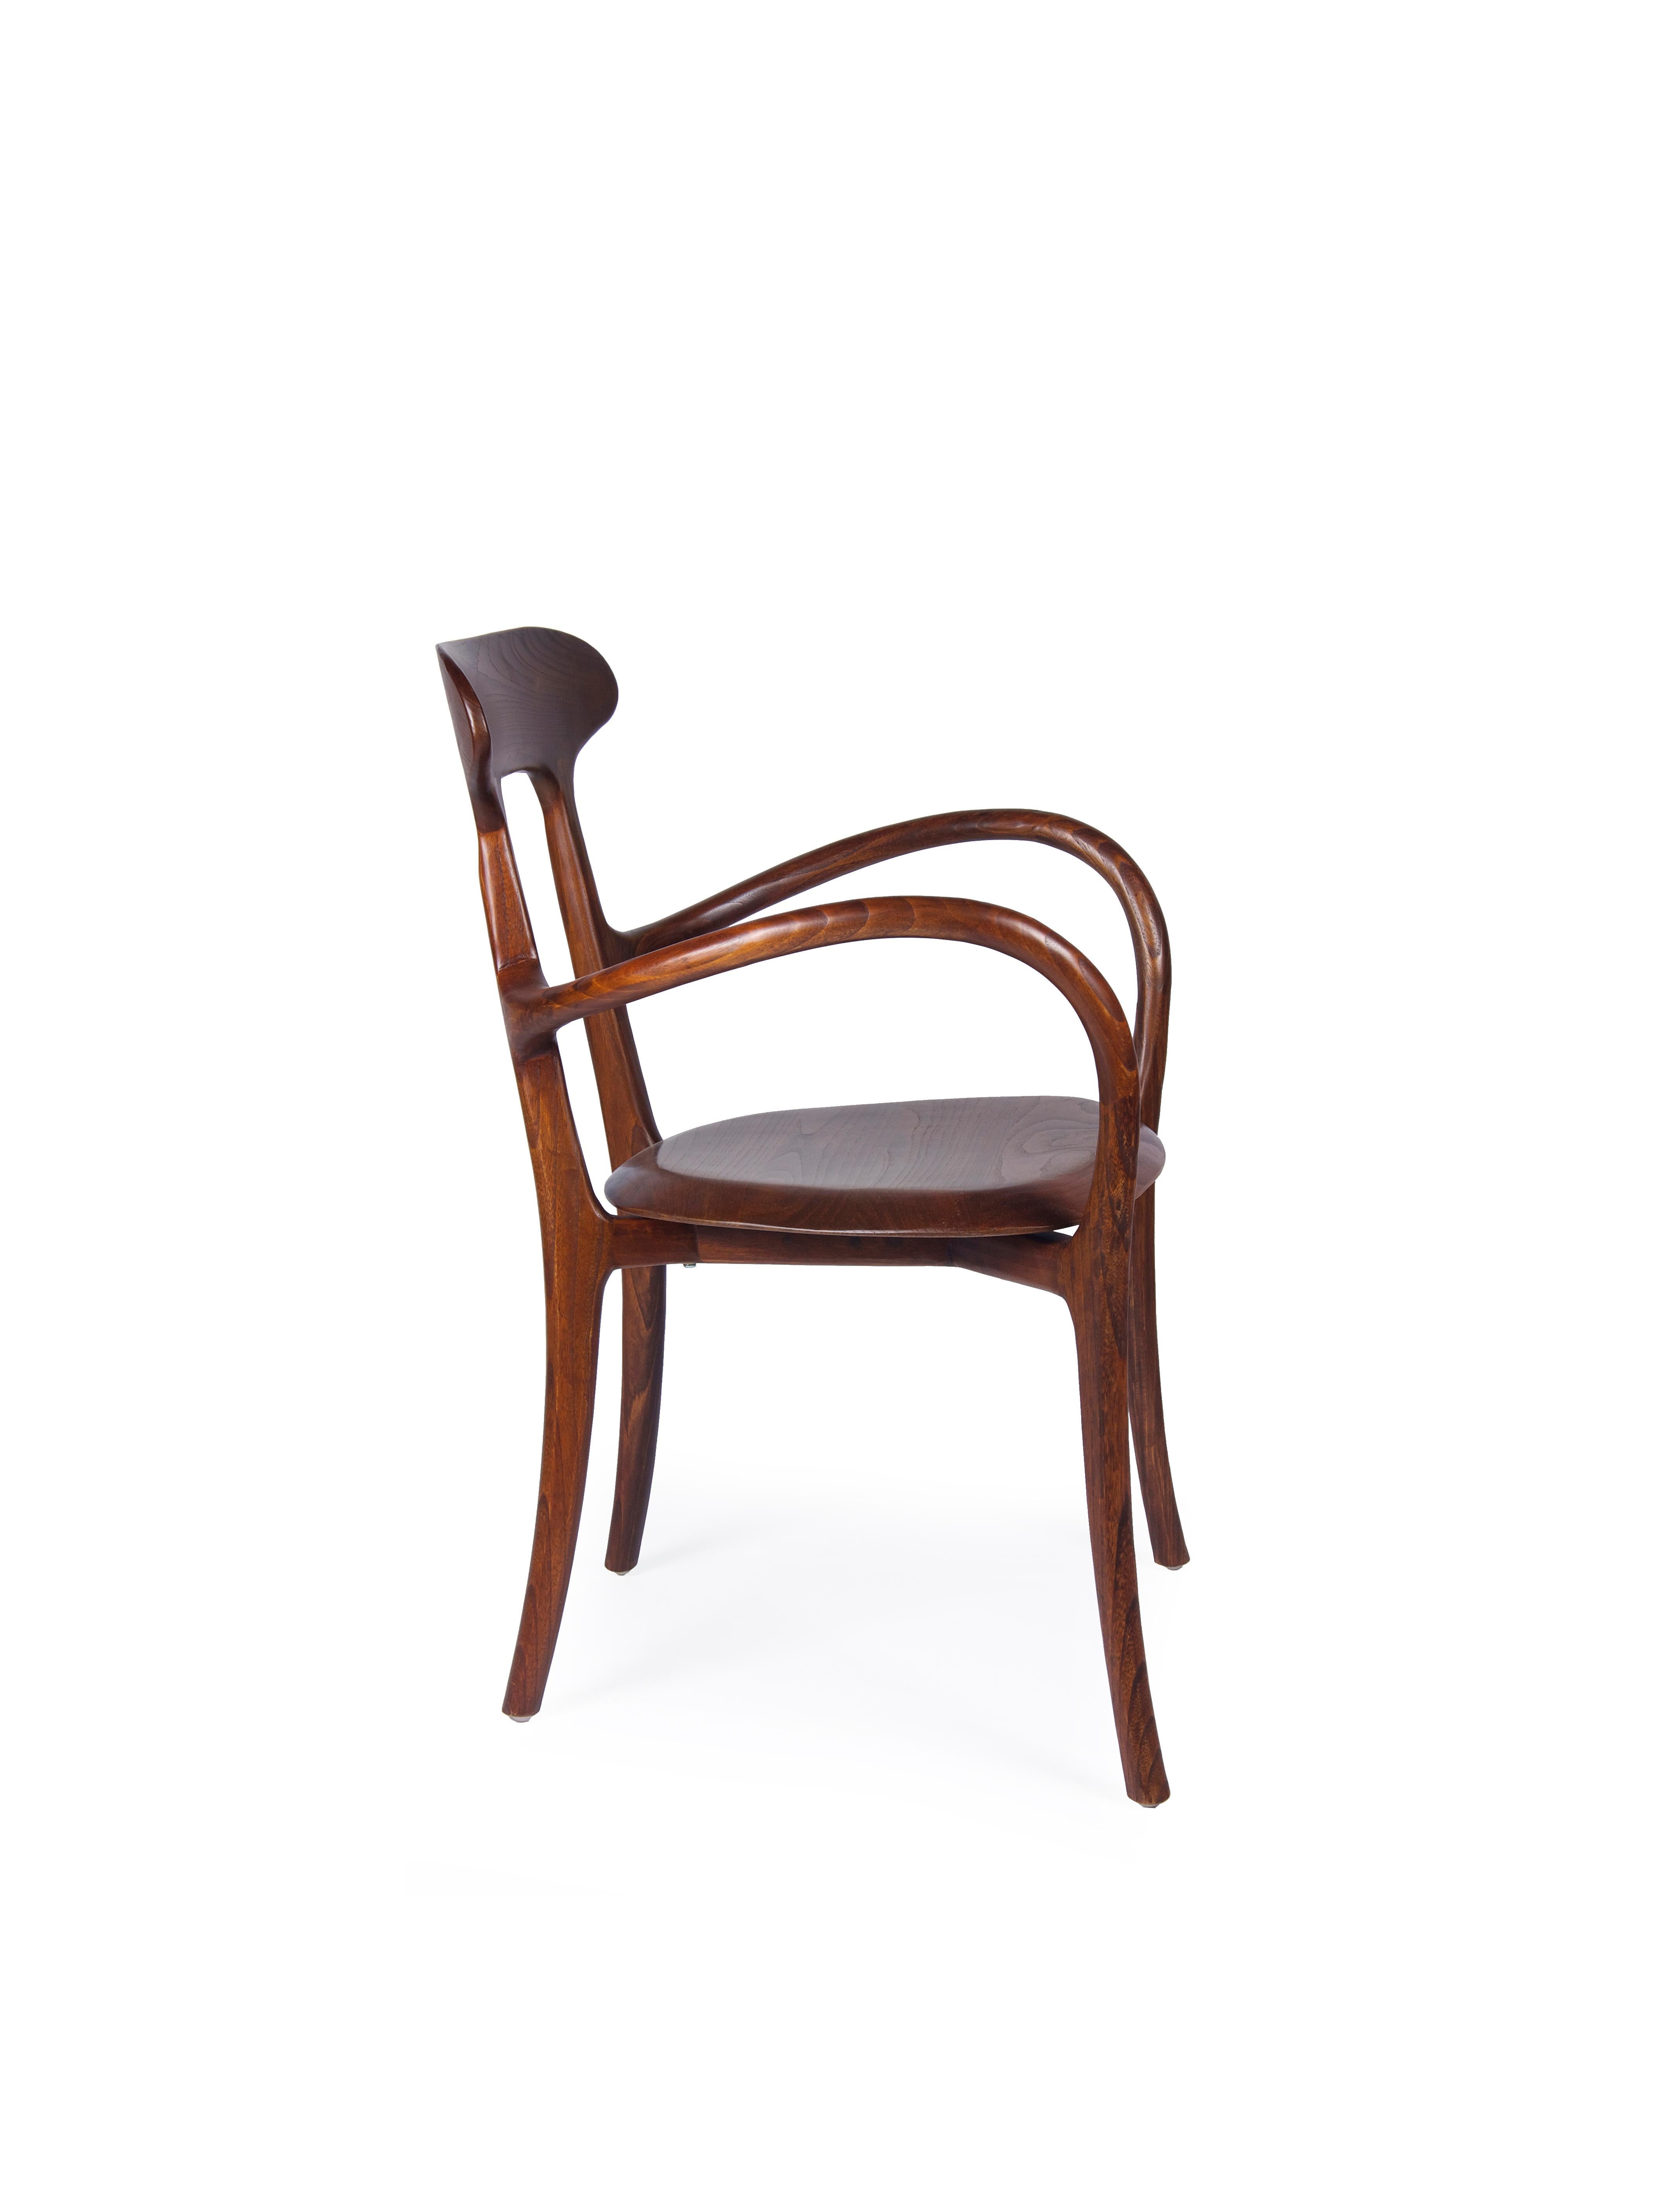 Organic Modern New Bentwood Armchair with Wood Seat and Back